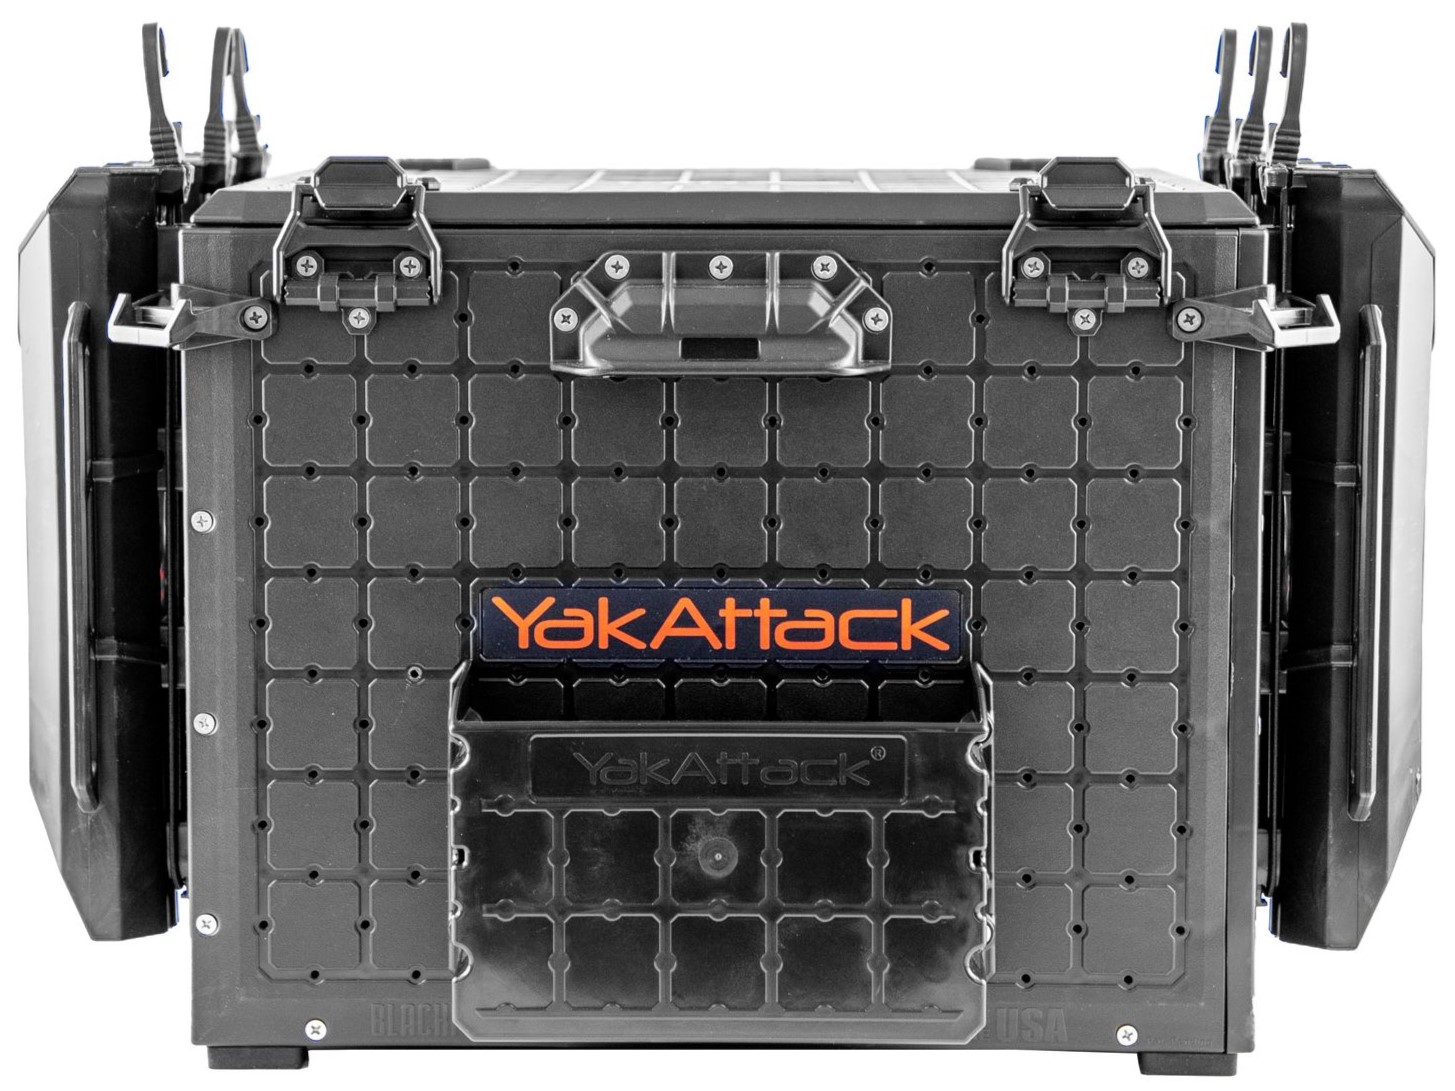 YakAttack 7.5" GridLoc PicPocket - Compatible with BlackPak Pro or TracPak, SKU: SSO-1005